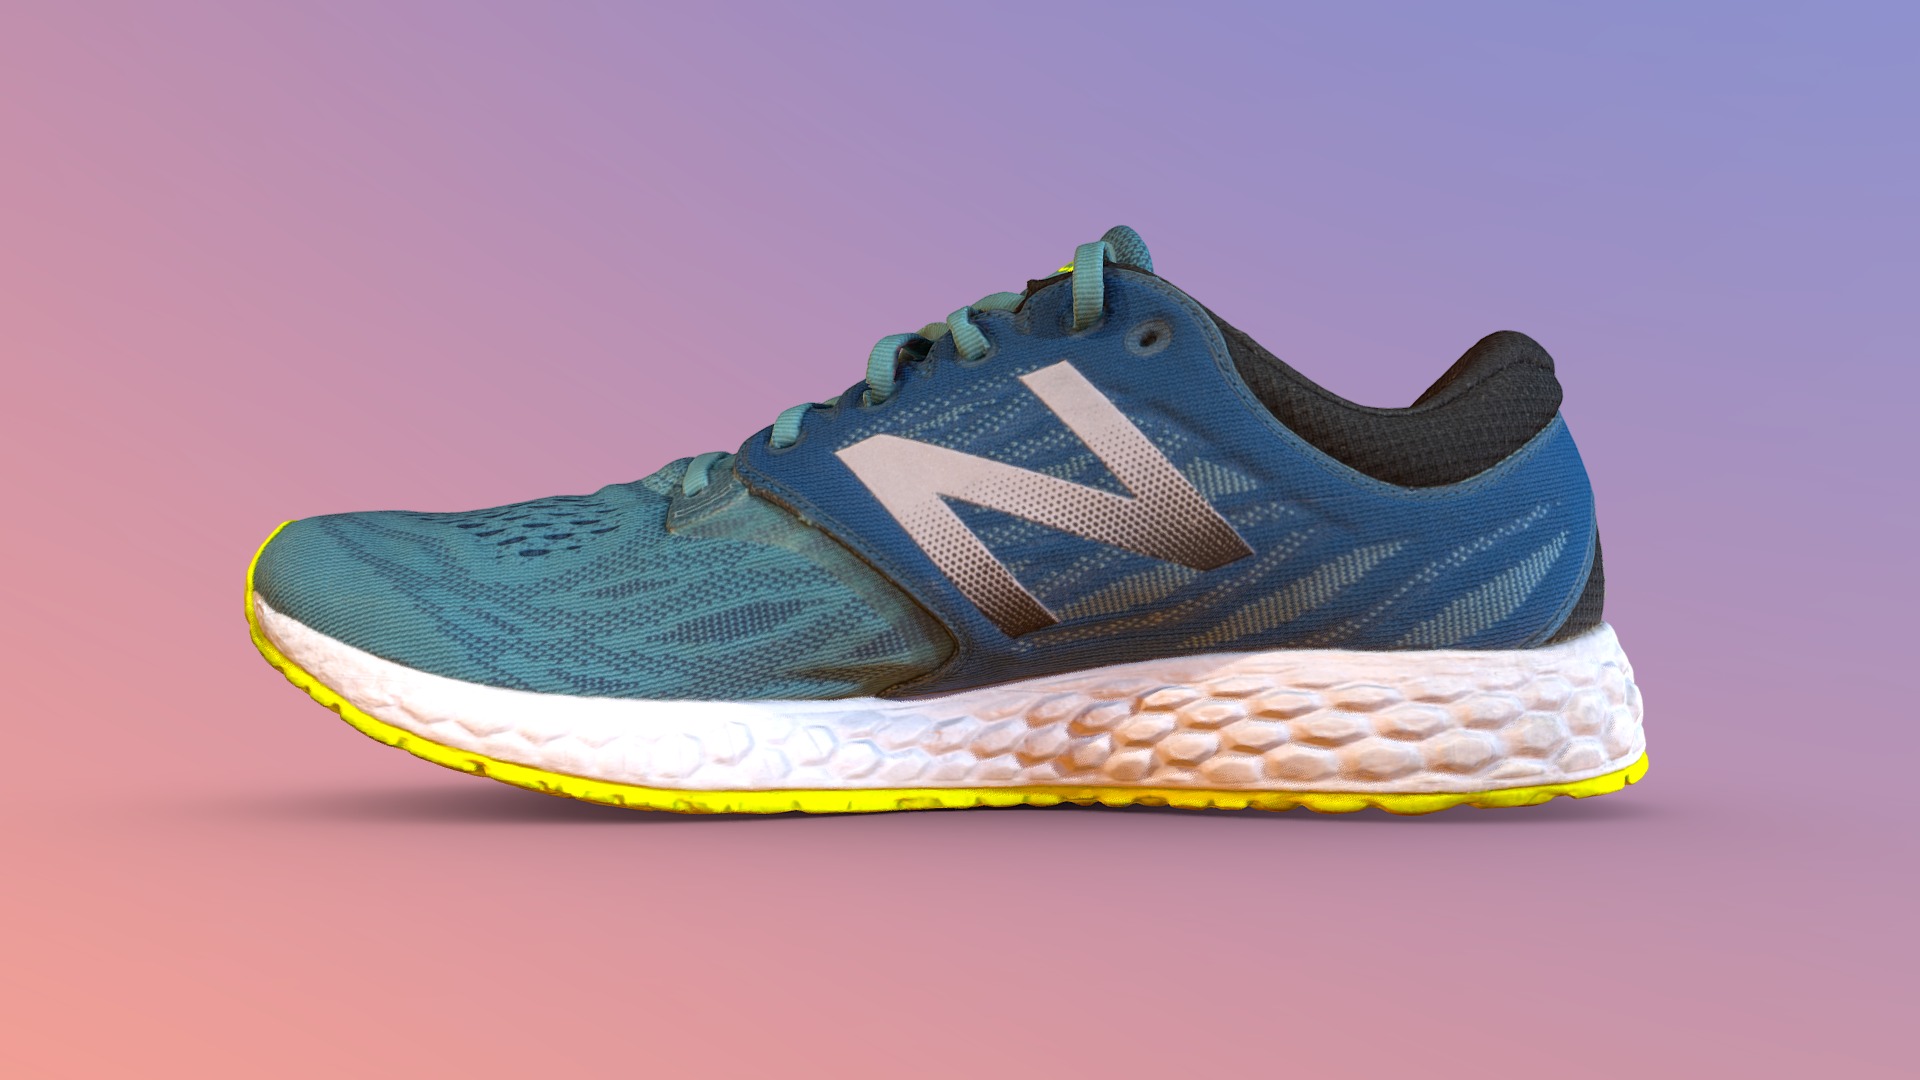 3D model New Balance Fresh Foam Zante v3 - This is a 3D model of the New Balance Fresh Foam Zante v3. The 3D model is about a blue and yellow shoe.